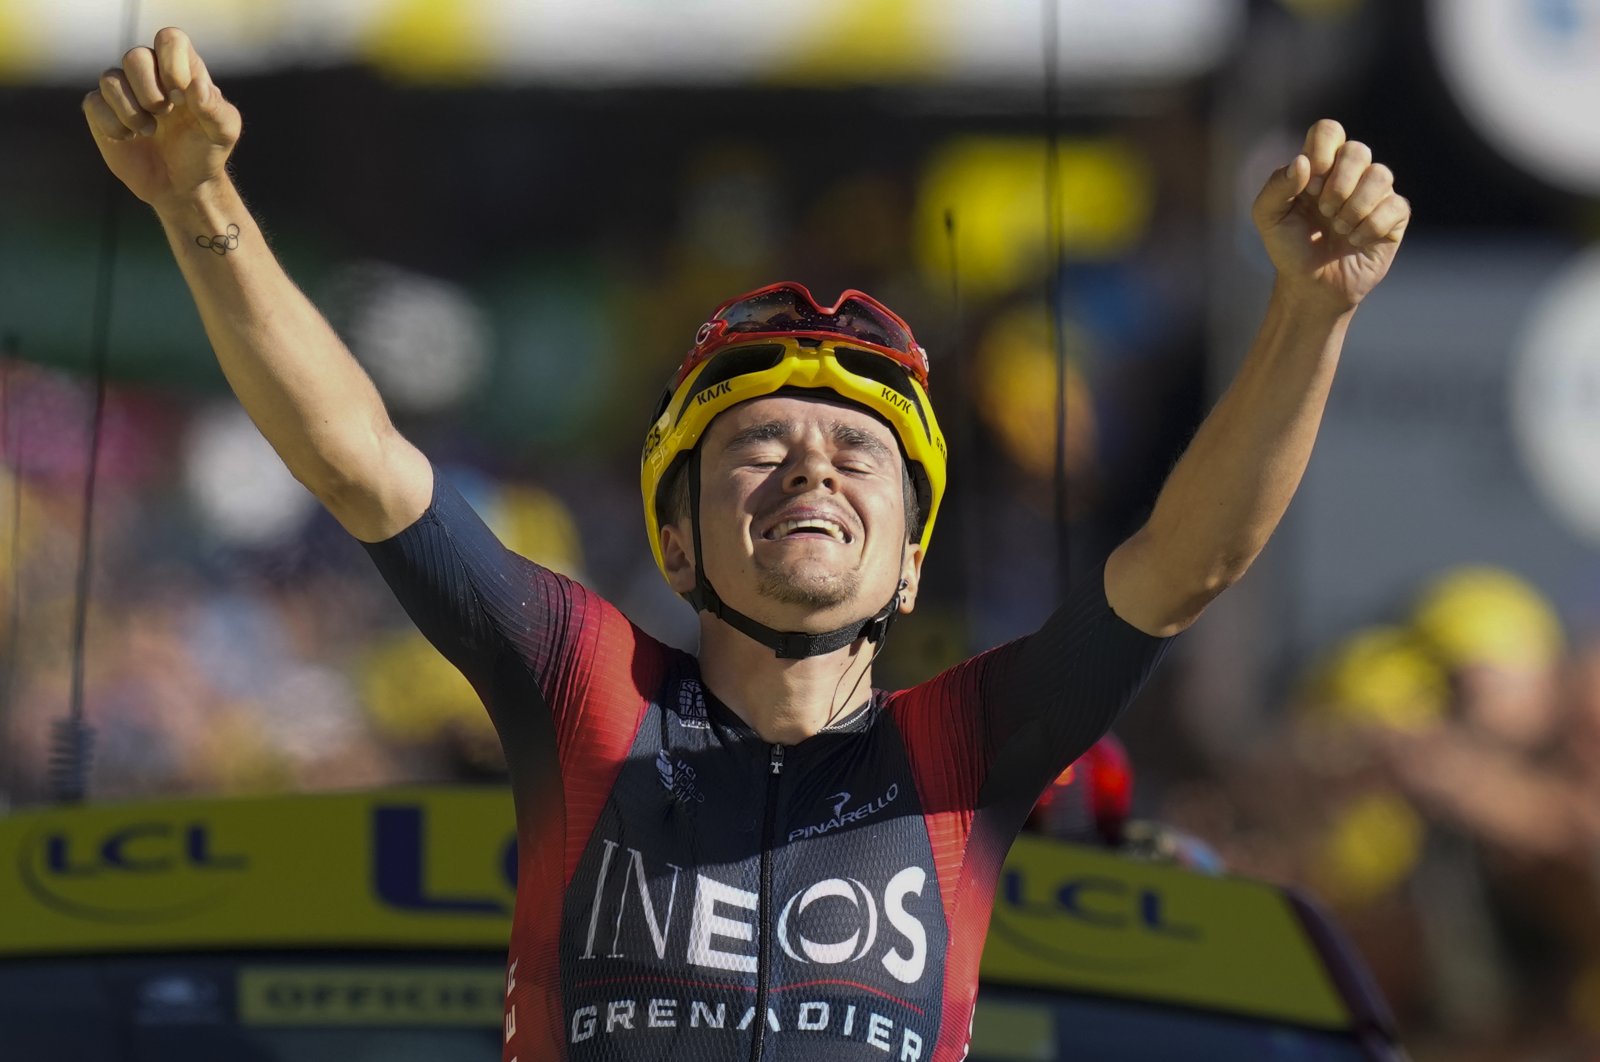 Stage winner Britain&#039;s Thomas Pidcock celebrates as he crosses the finish line of the 12th stage of the Tour de France cycling race over 165.5 kilometers (102.8 miles) with start in Briancon and finish in Alpe d&#039;Huez, France, July 14, 2022. (AP Photo)